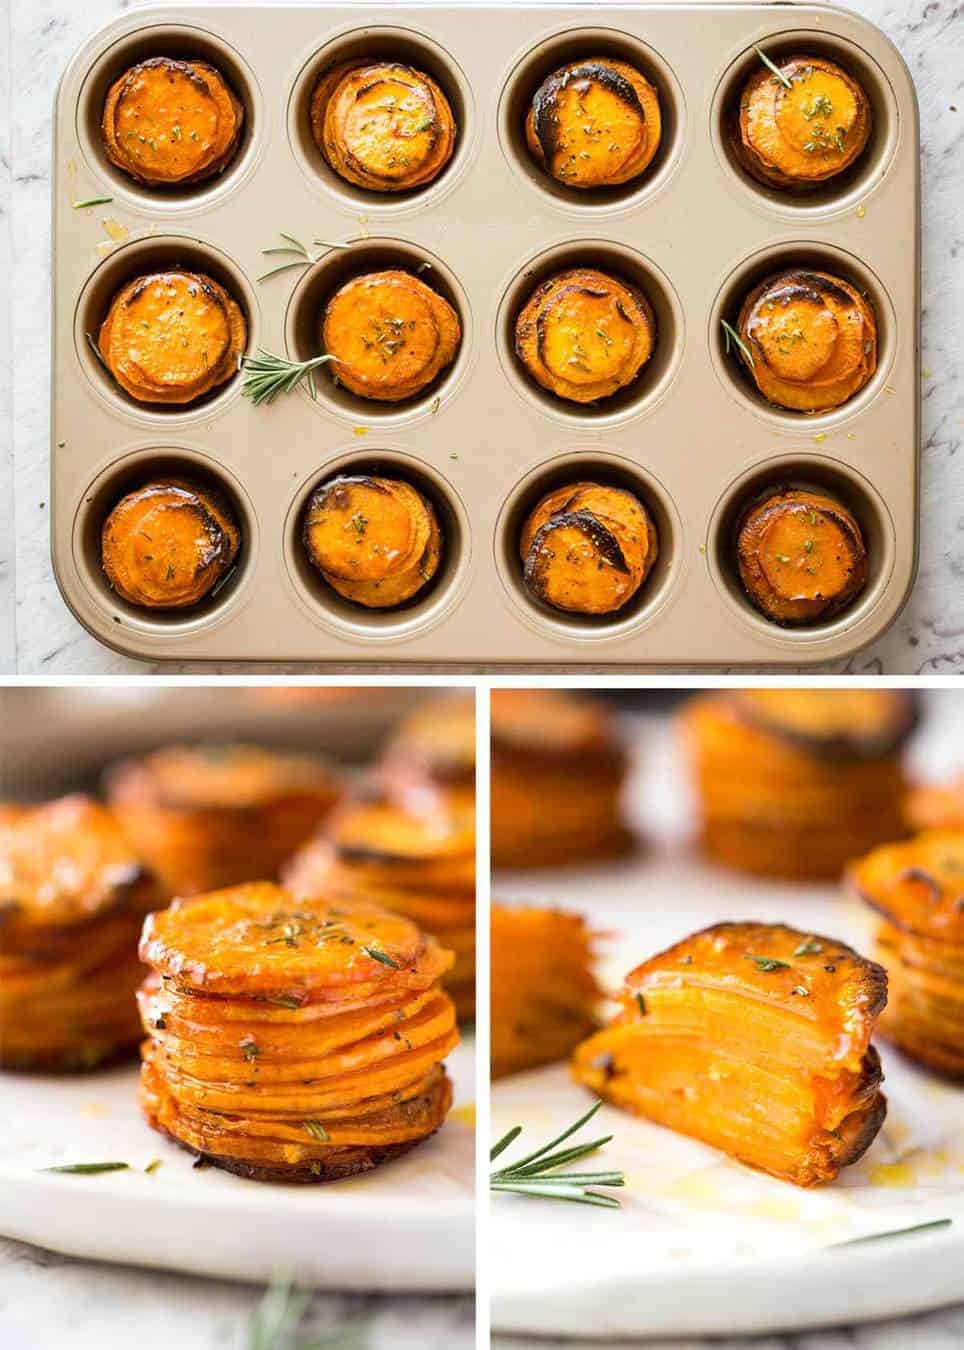 These Roasted Sweet Potato Stacks have crispy edges, are buttery, salty and sweet with a hint of rosemary. Terrific Sweet Potato side dish! recipetineats.com